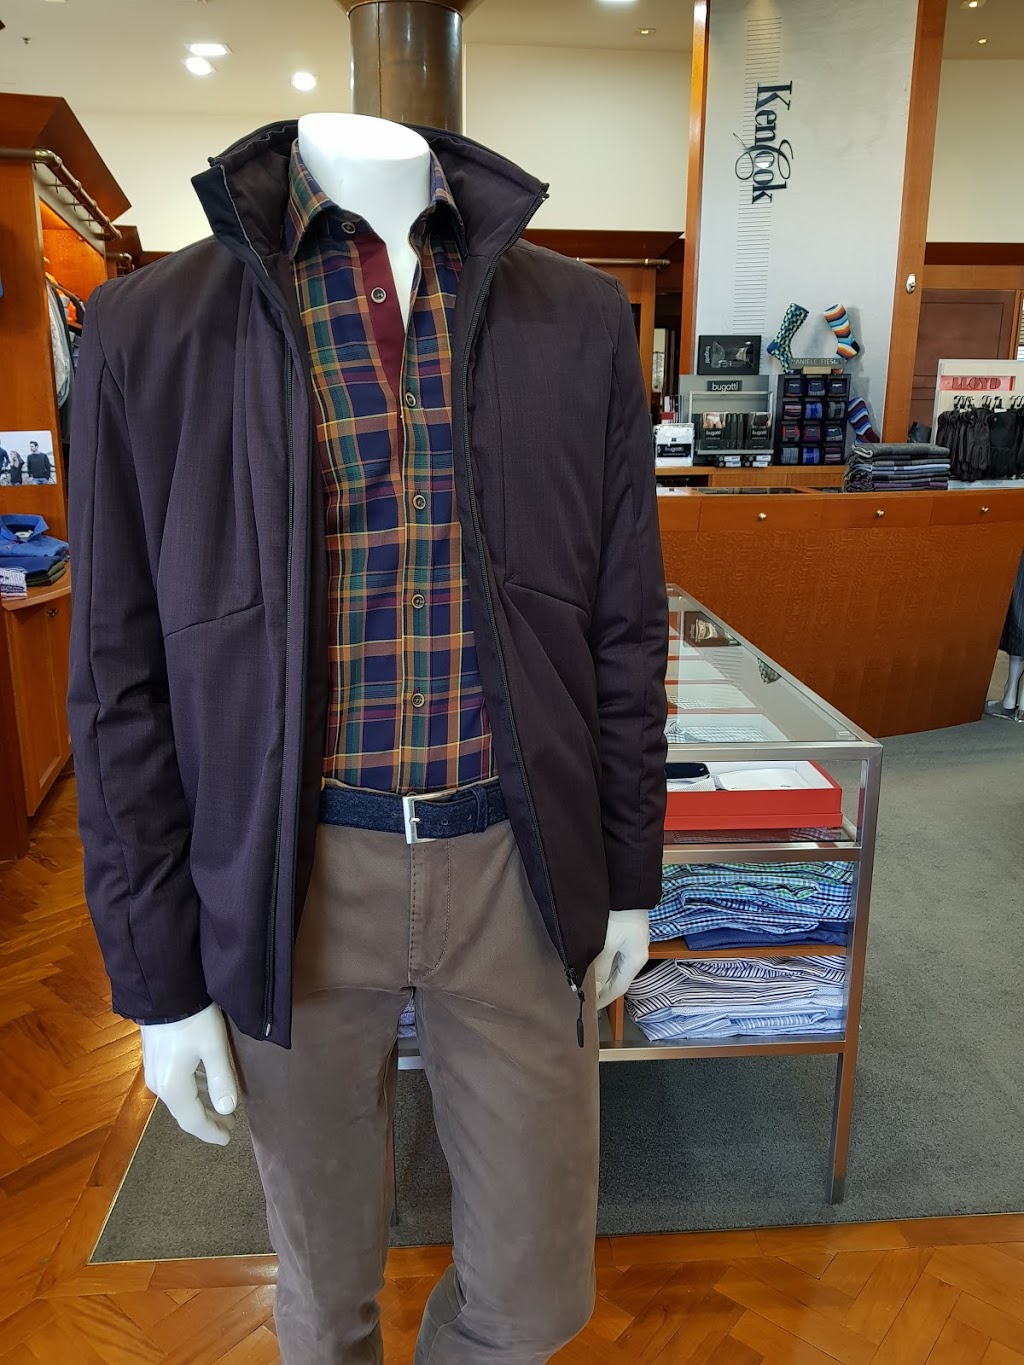 Ken Cook Menswear | clothing store | Petrie Plaza, Canberra ACT 2601, Australia | 0262479842 OR +61 2 6247 9842